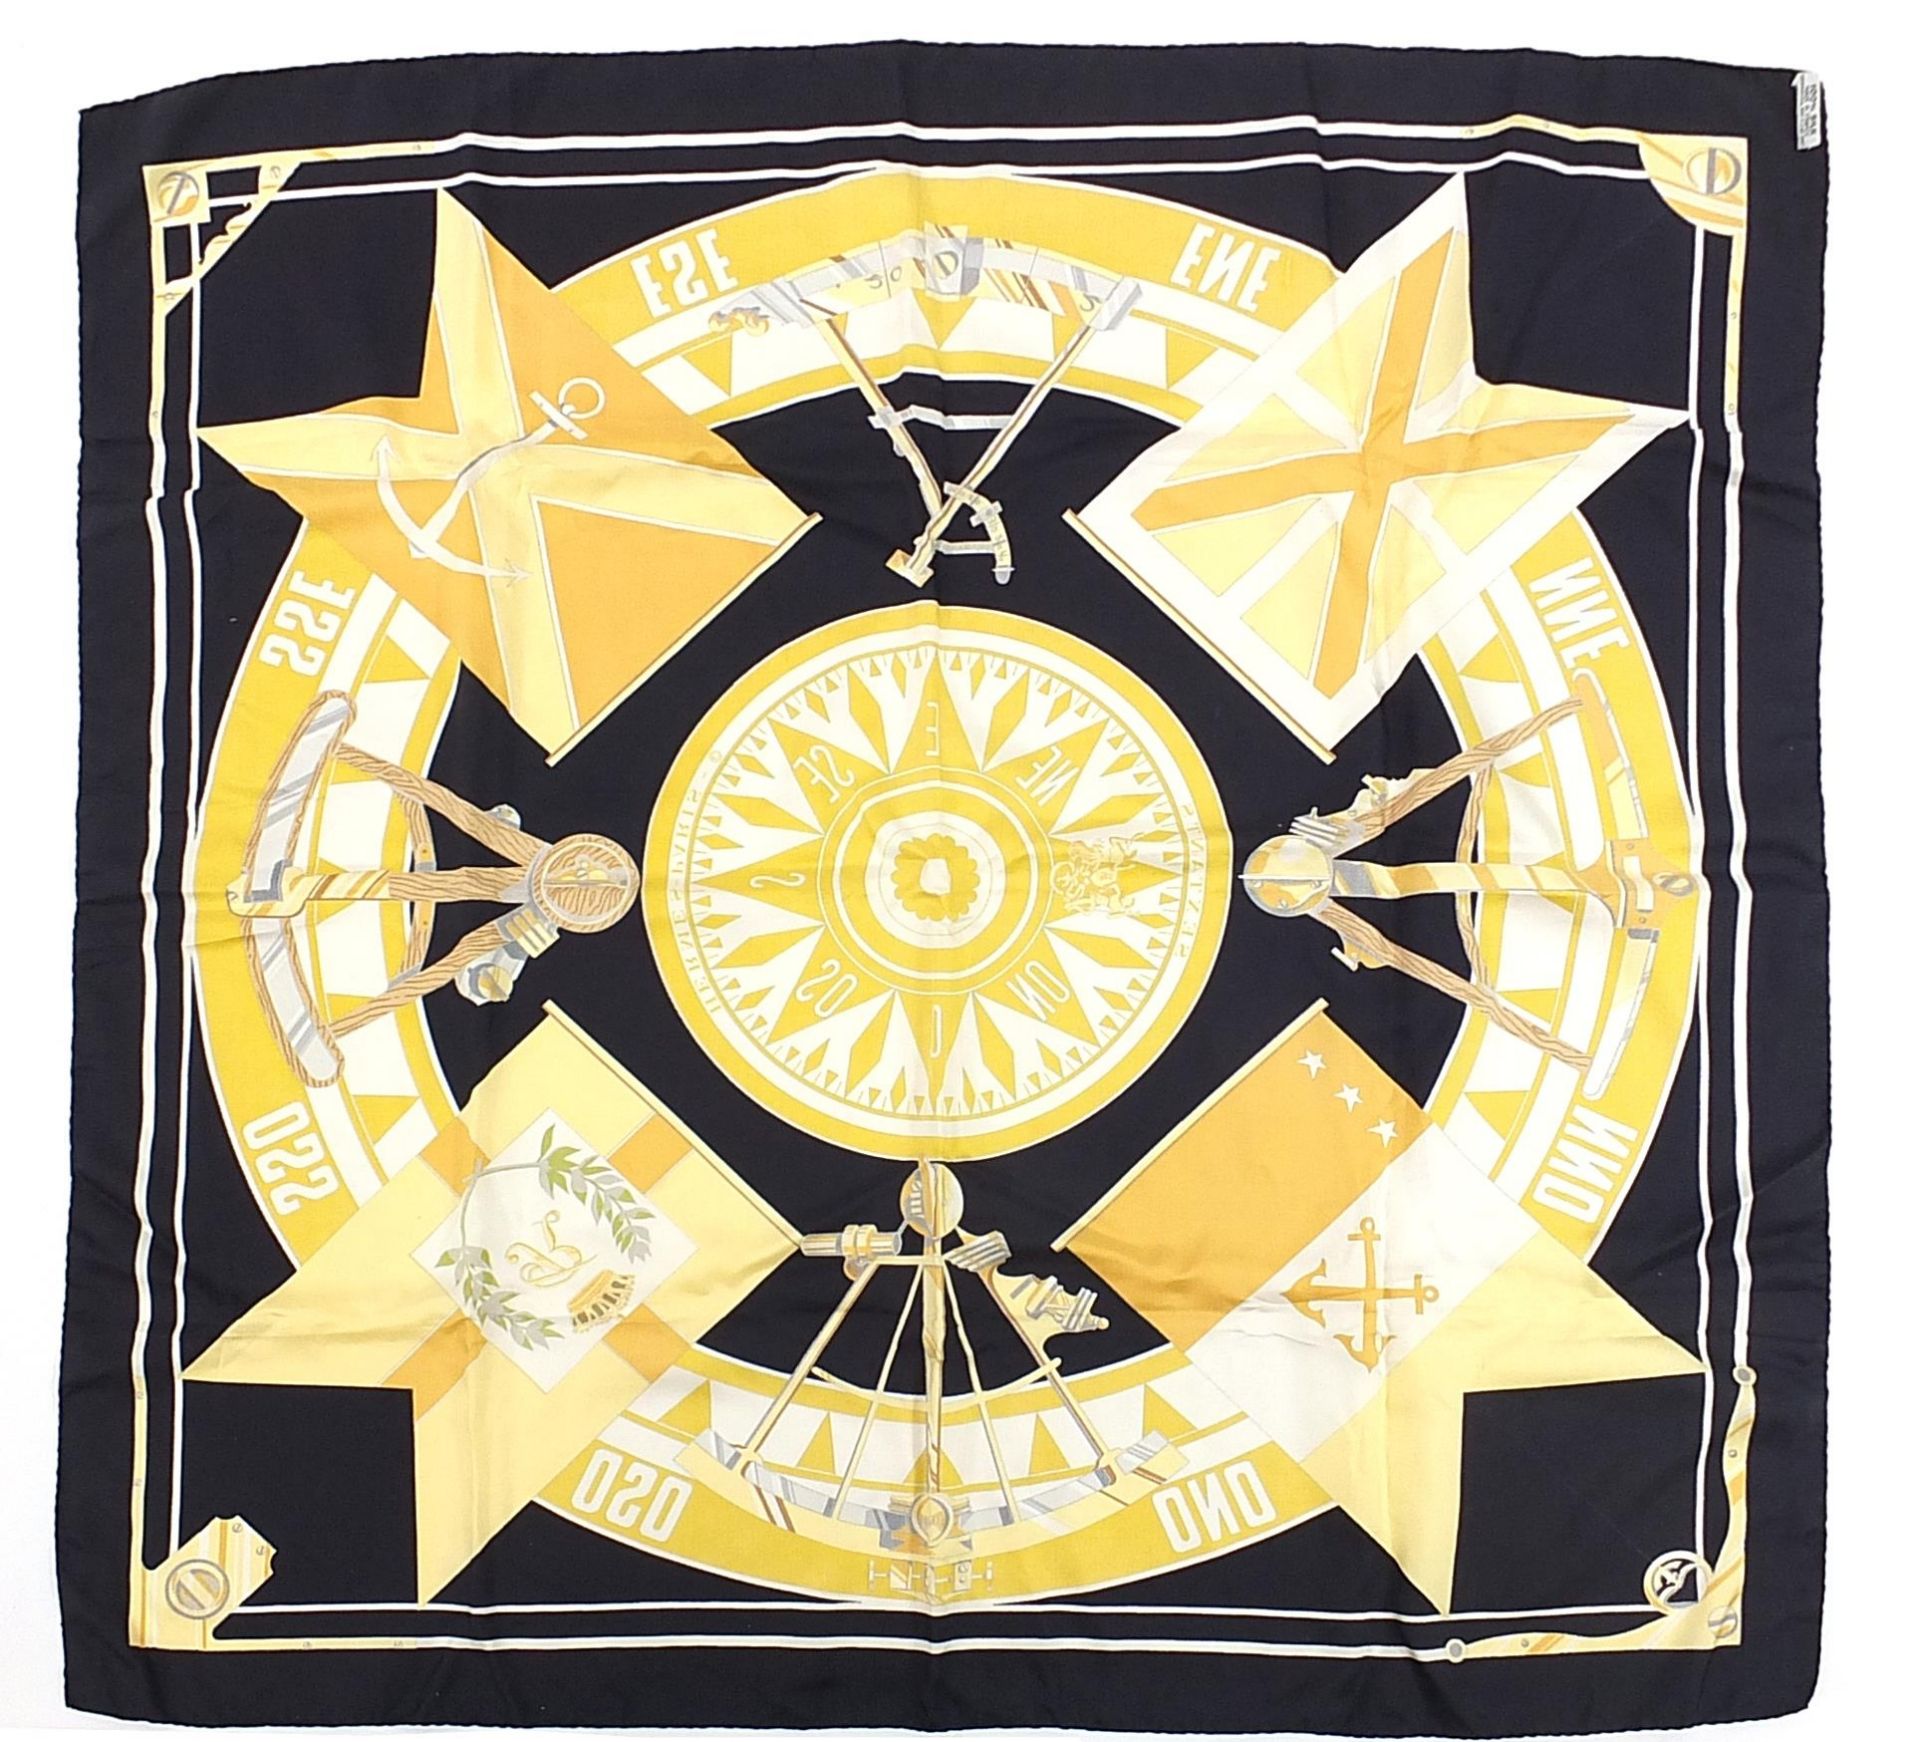 Hermes sextant silk scarf by Loic Dubigeon with box - Image 2 of 5